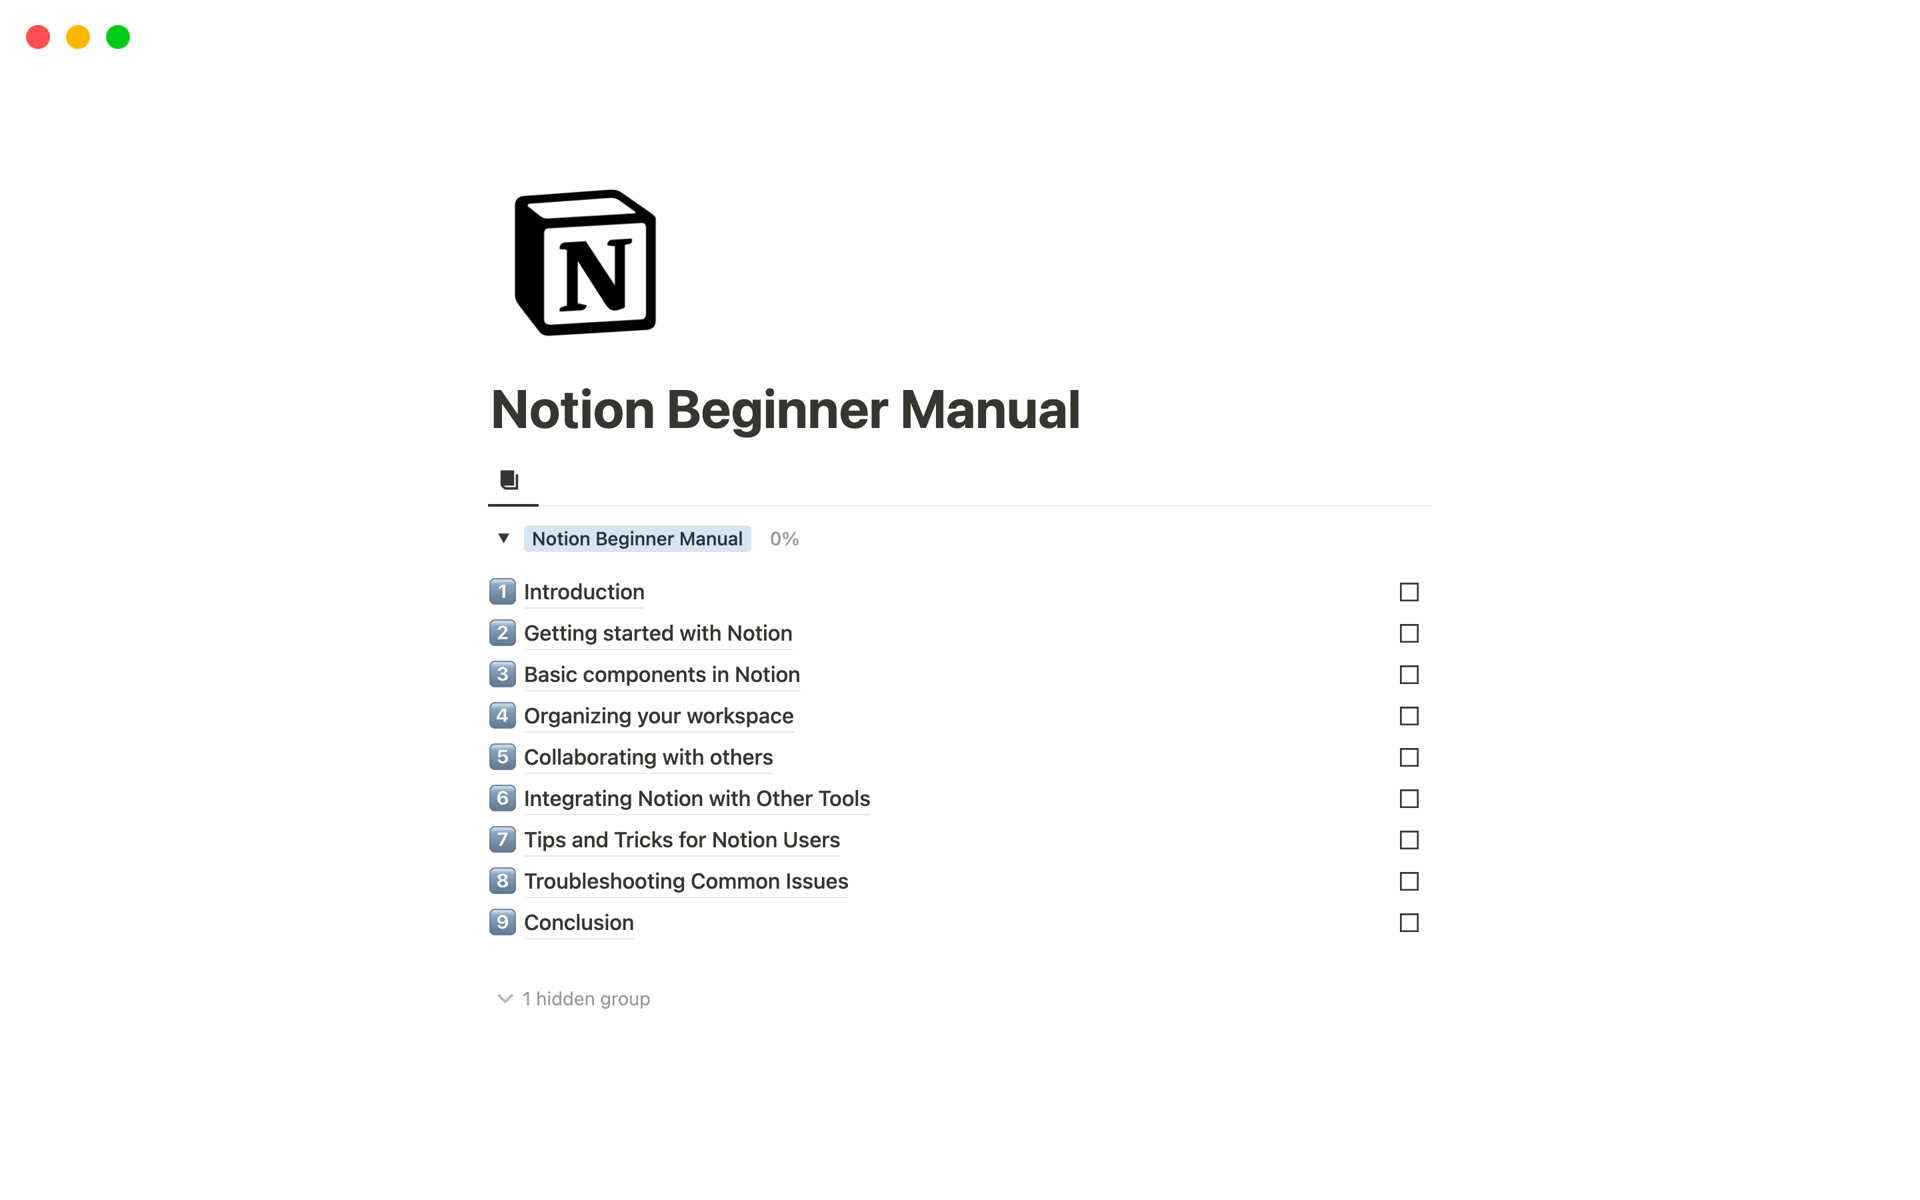 Learn how to use and understand Notion
